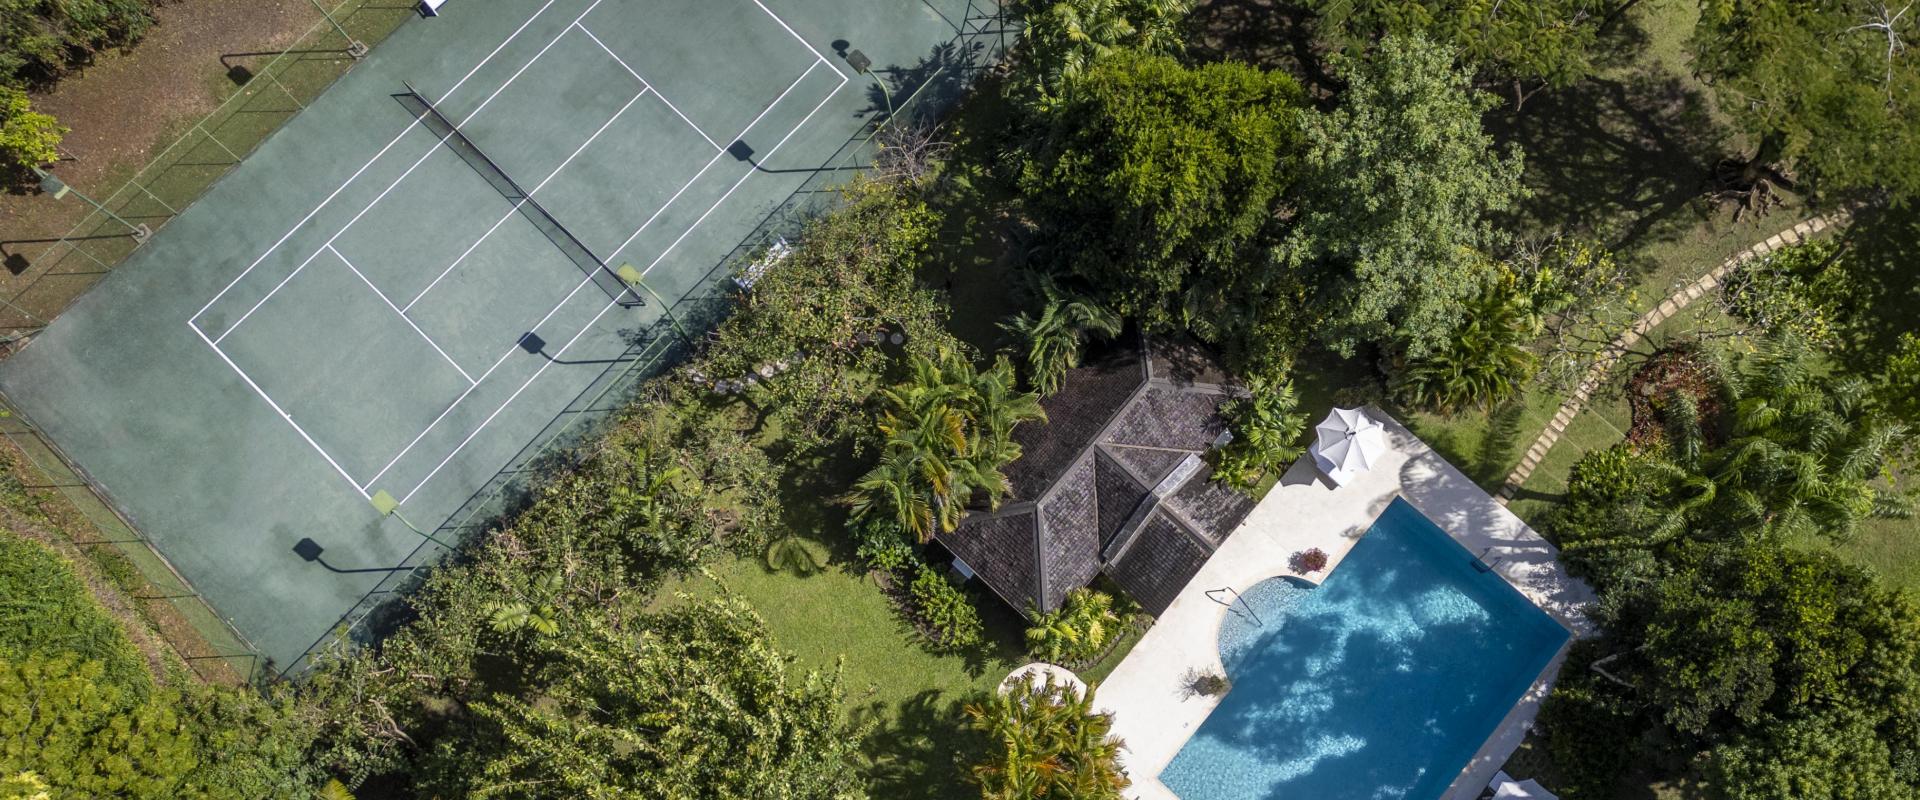 Heronetta Sandy Lane Estate Barbados Aerial View of Pool, Pool House and Tennis Courts